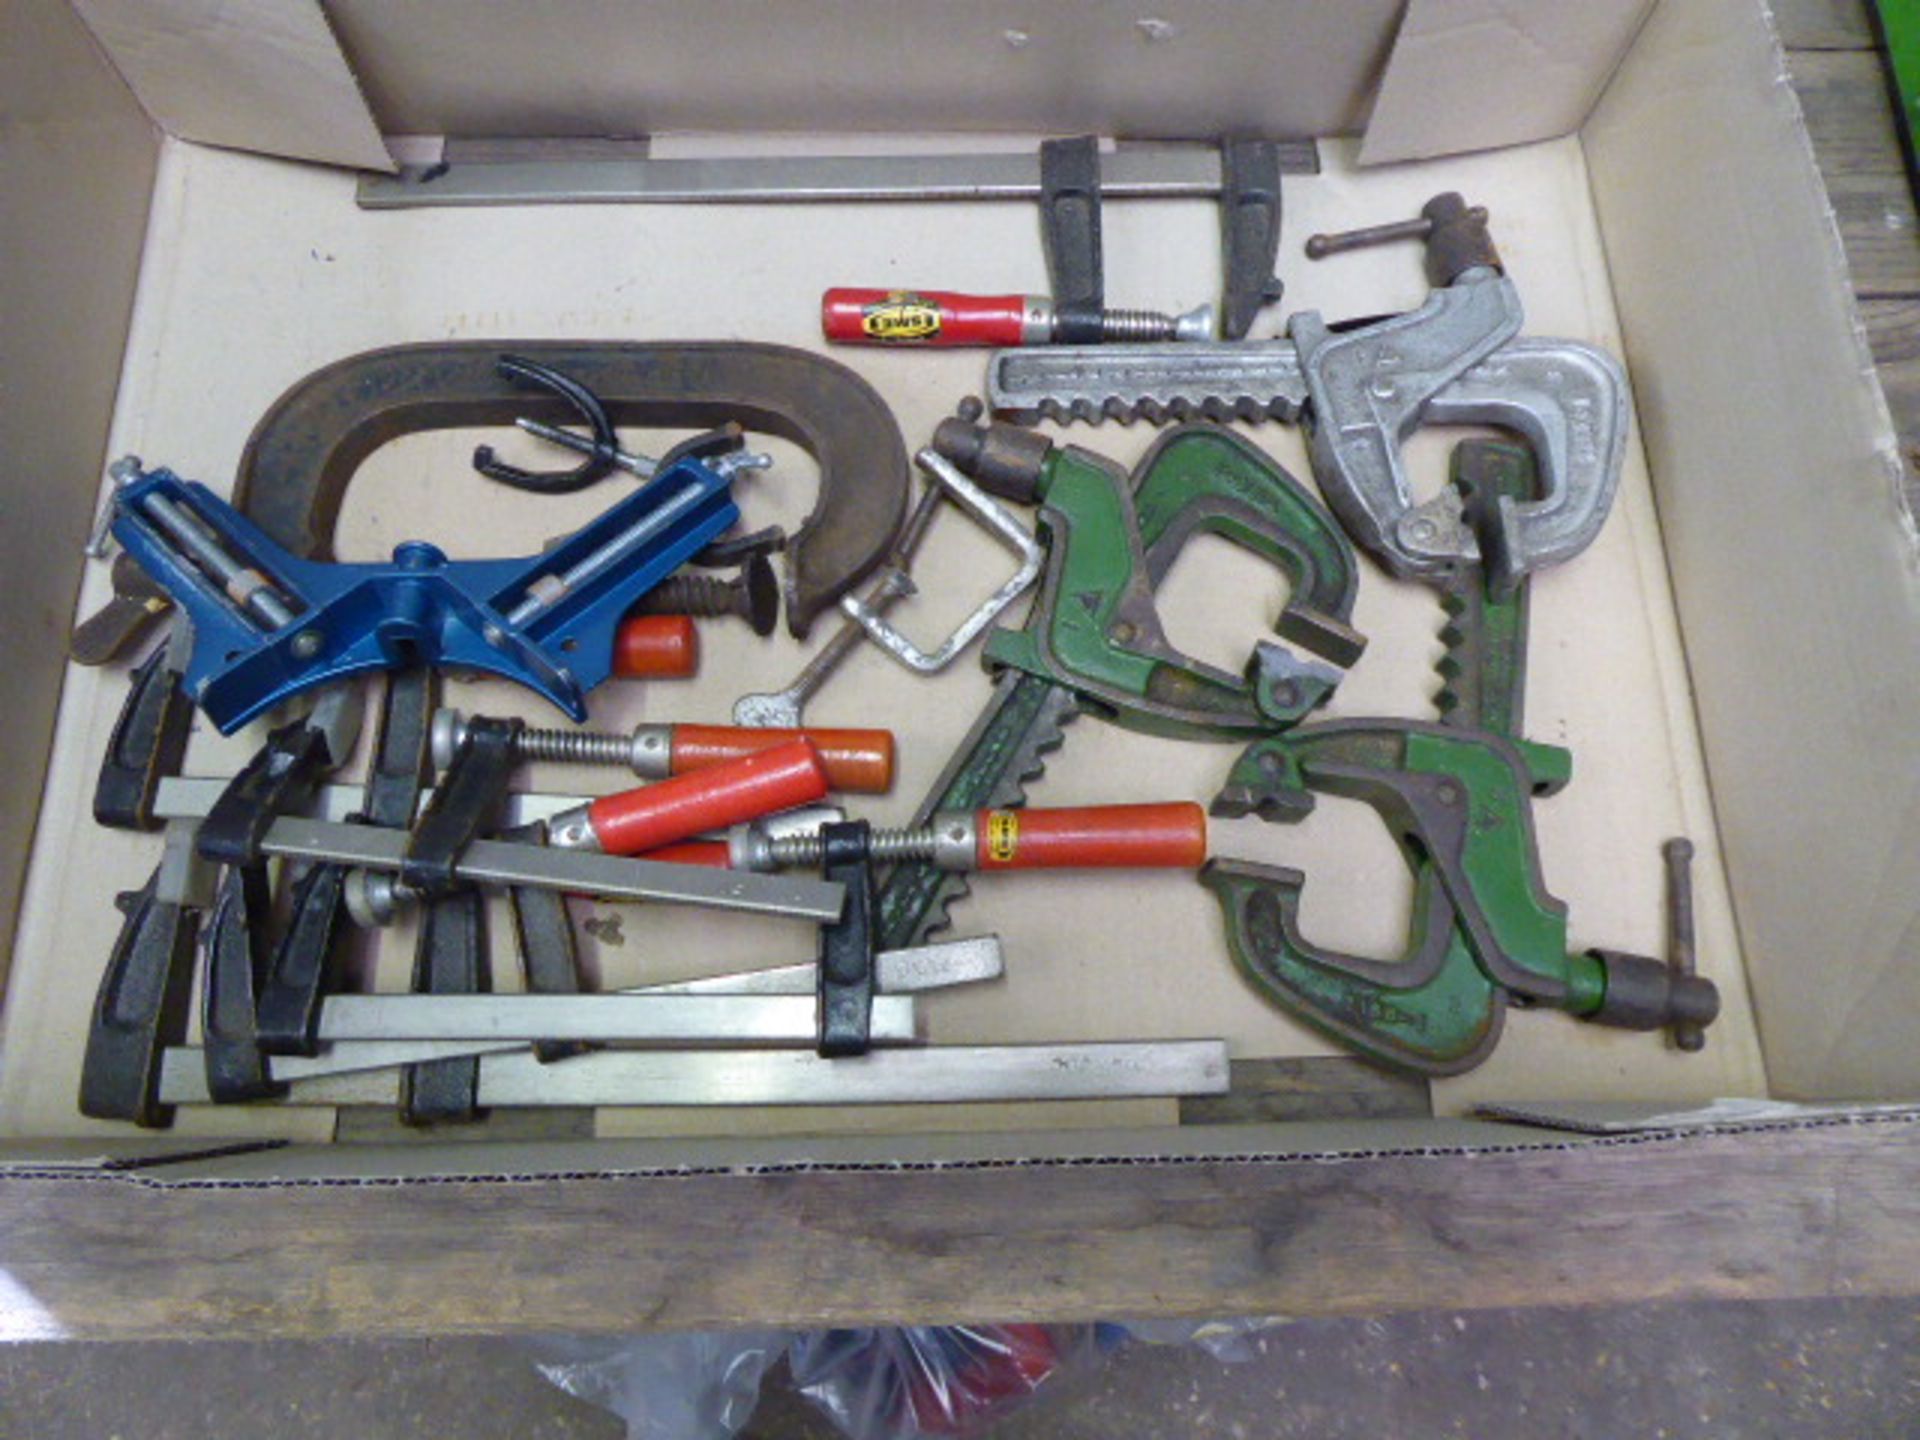 Tray of assorted F clamps, G clamps and speed clamps